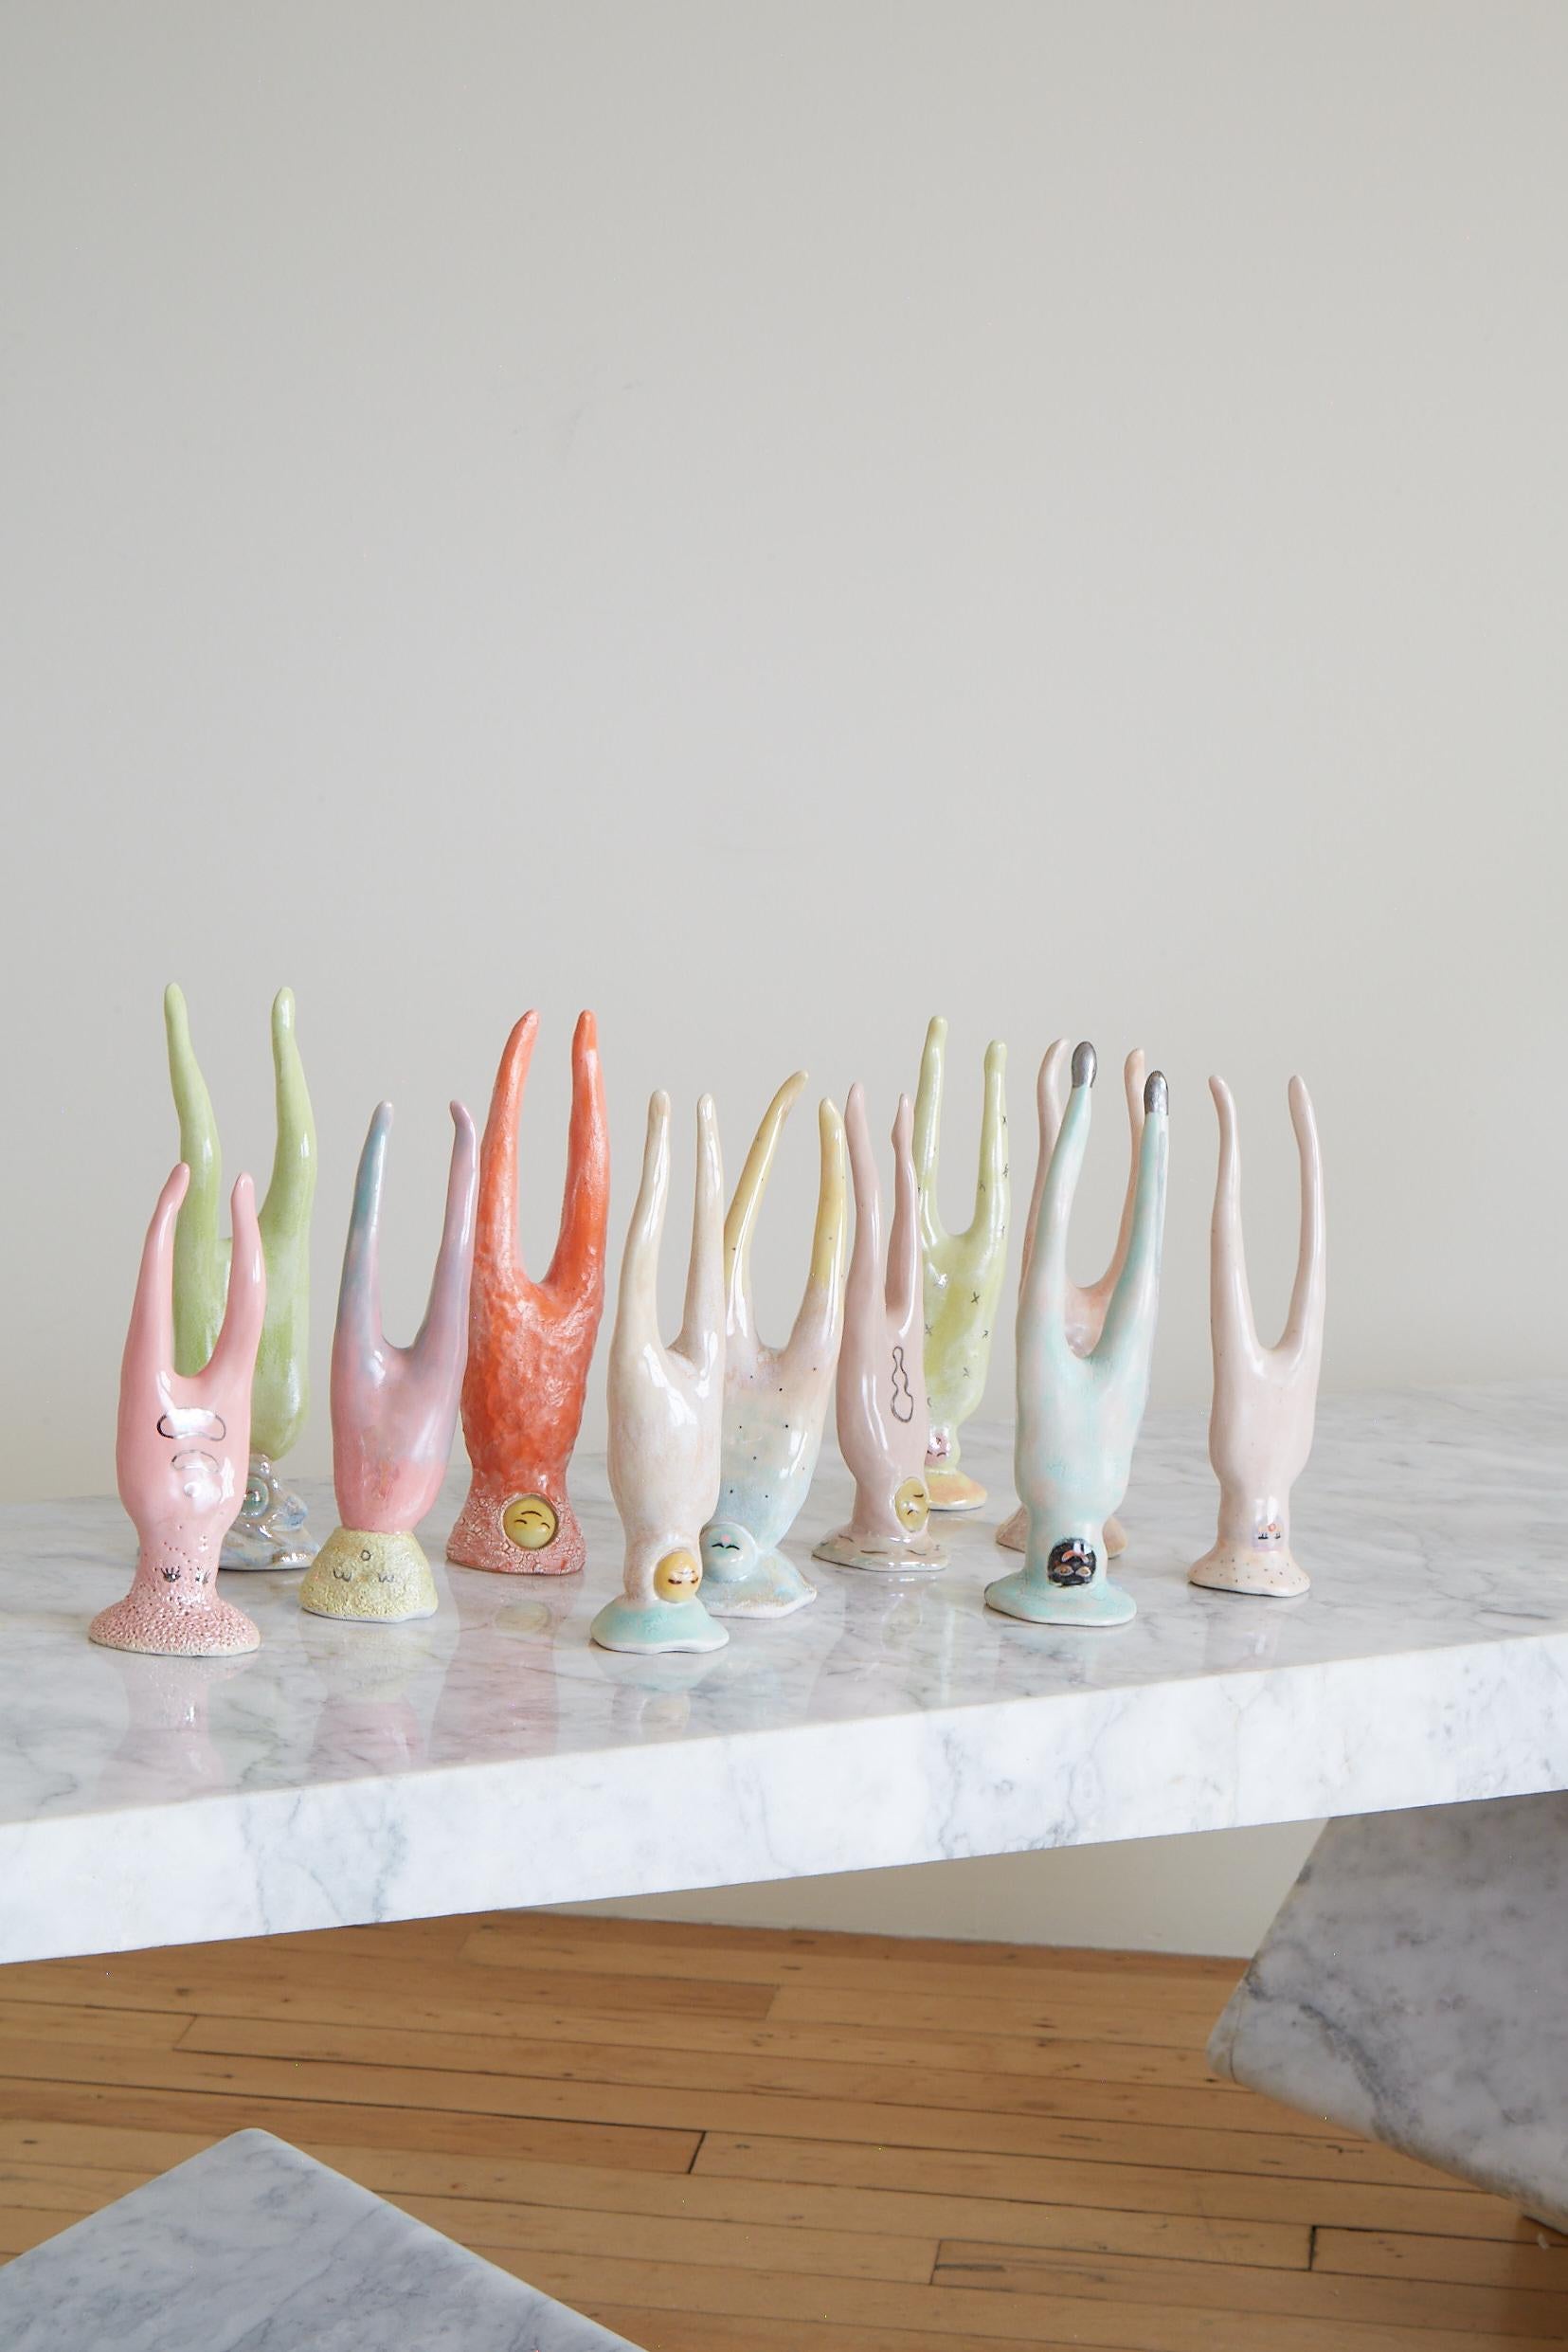 
Each of Kaley Flowers’ creations are one-of-a-kind, imbued with Flowers’ own well-cultivated aesthetic. These talisman-like figurines are bursting with playful depth, imaginatively and meticulously detailed in a range of super kawaii-colors and